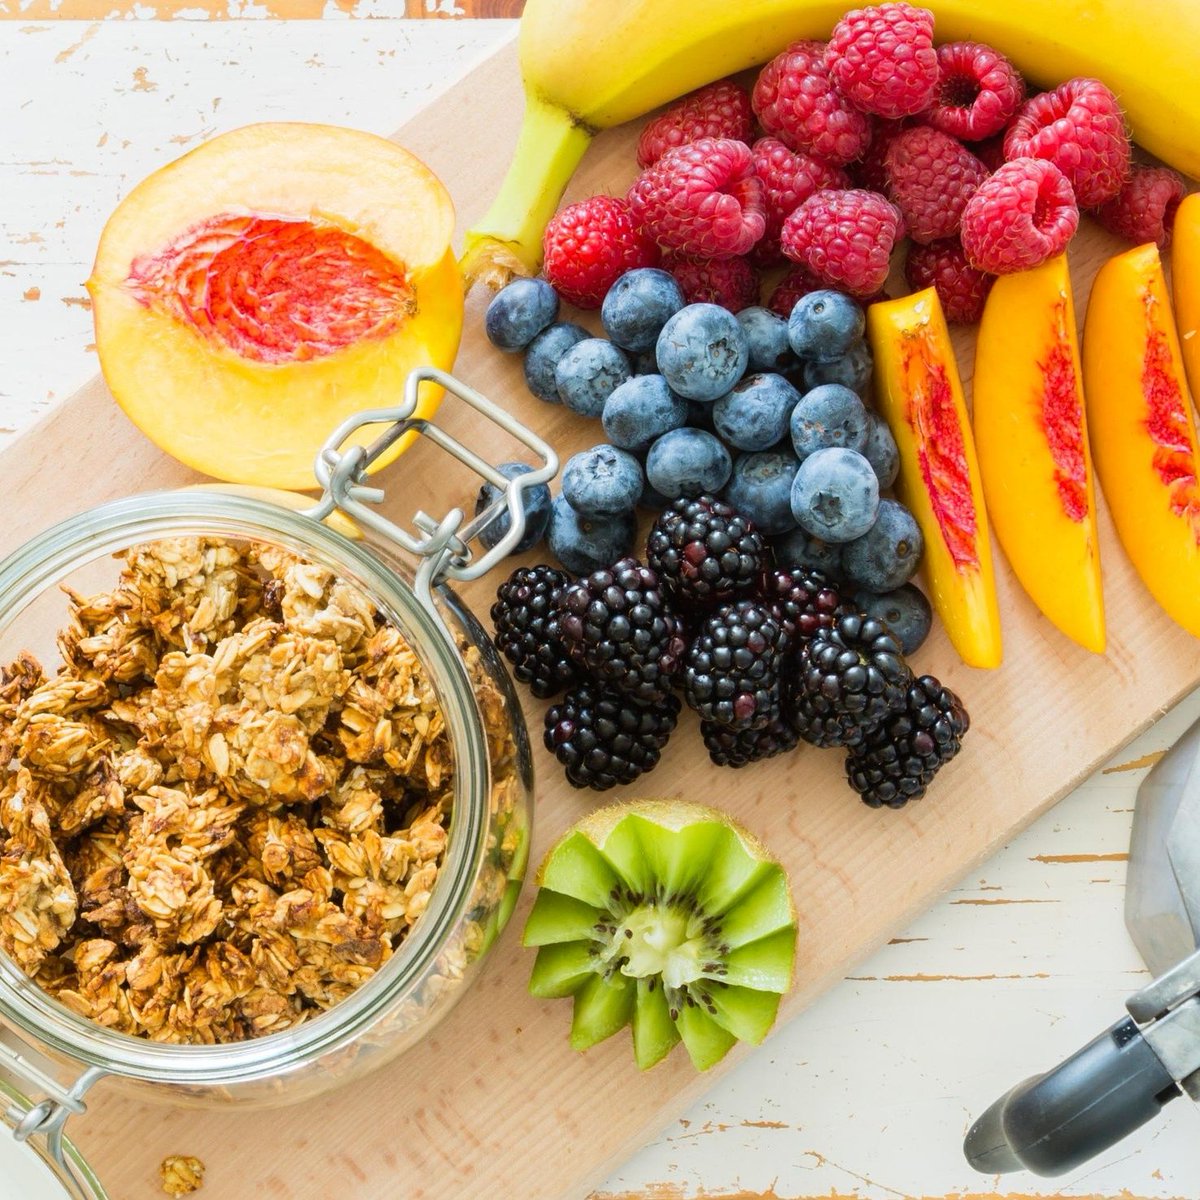 Breakfast is tapped as the most important meal of the day. Some may debate the title, but plenty of studies suggest it is well earned, given the benefits associated with it. Learn more: kowalskis.com/articles/rise-…